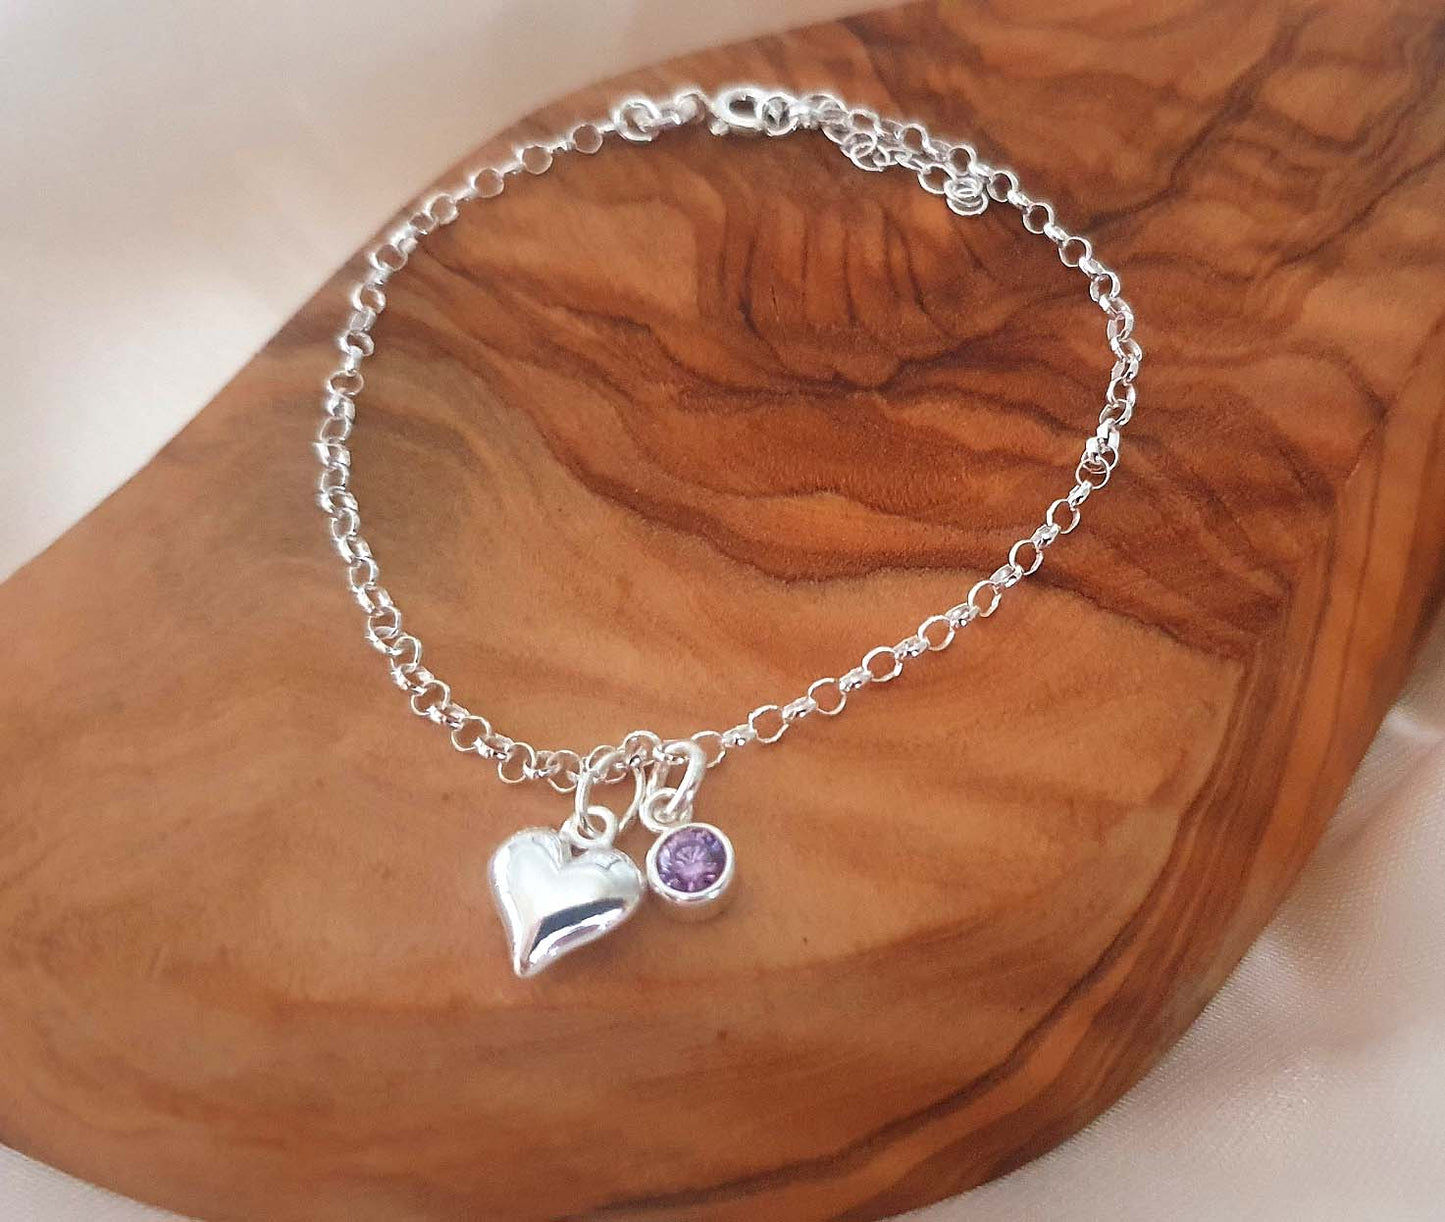 Daughter Puffy Heart Bracelet with Birthstone in Sterling Silver 925, Personalised Gift